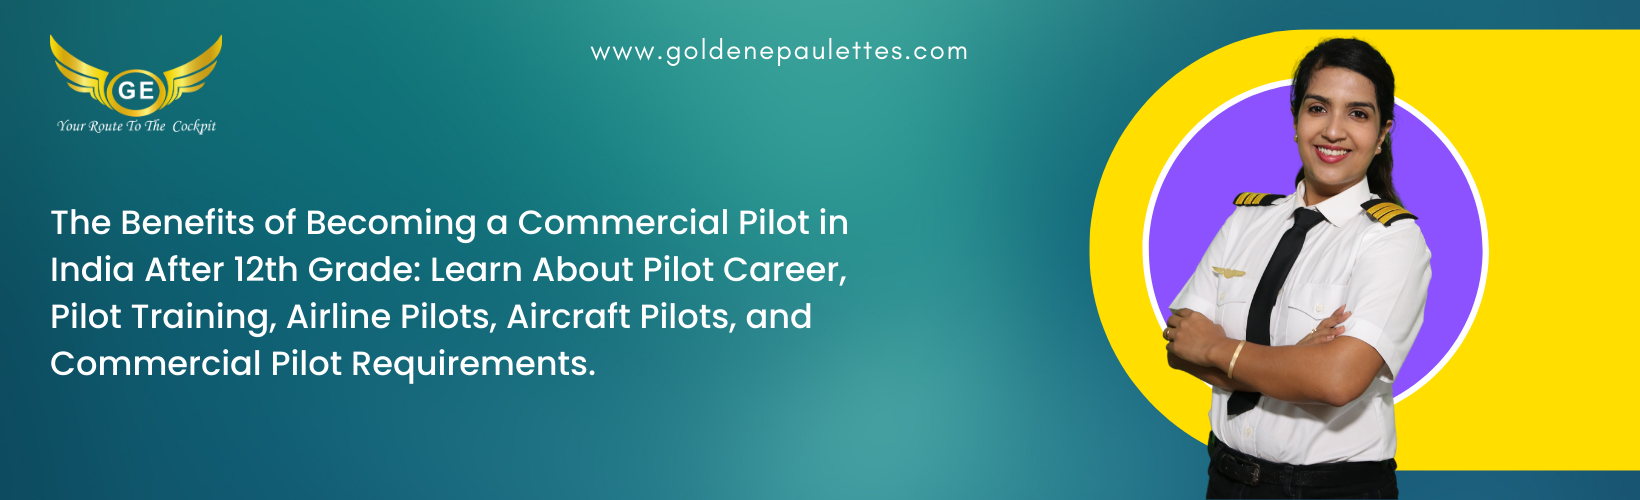 What Are the Benefits of Being a Commercial Pilot After 12th in India